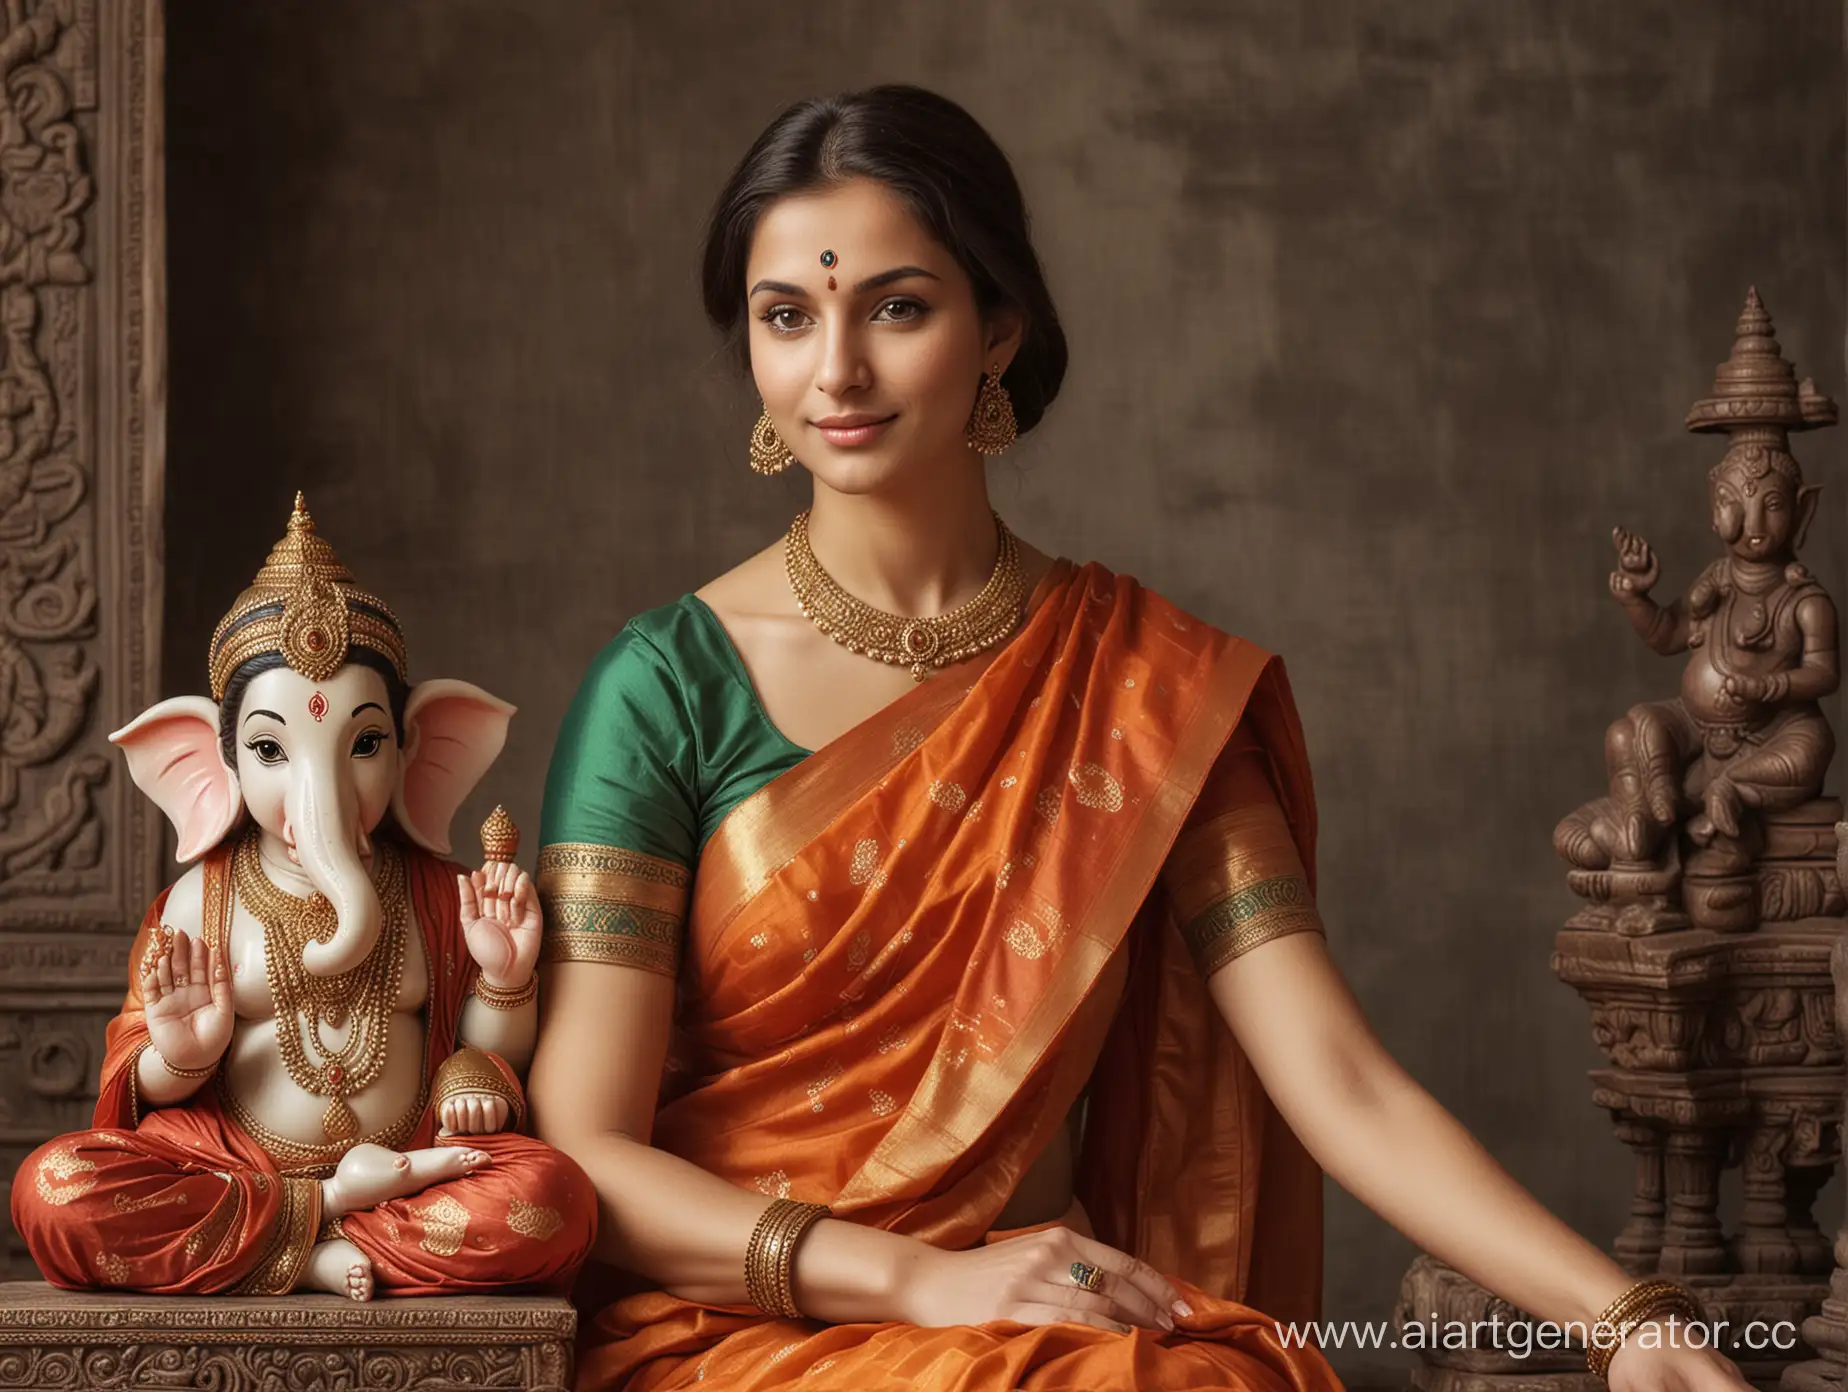 A beautiful European woman in a sari sits next to Lord Ganesha. They are the same height. Ganesha is two-armed.